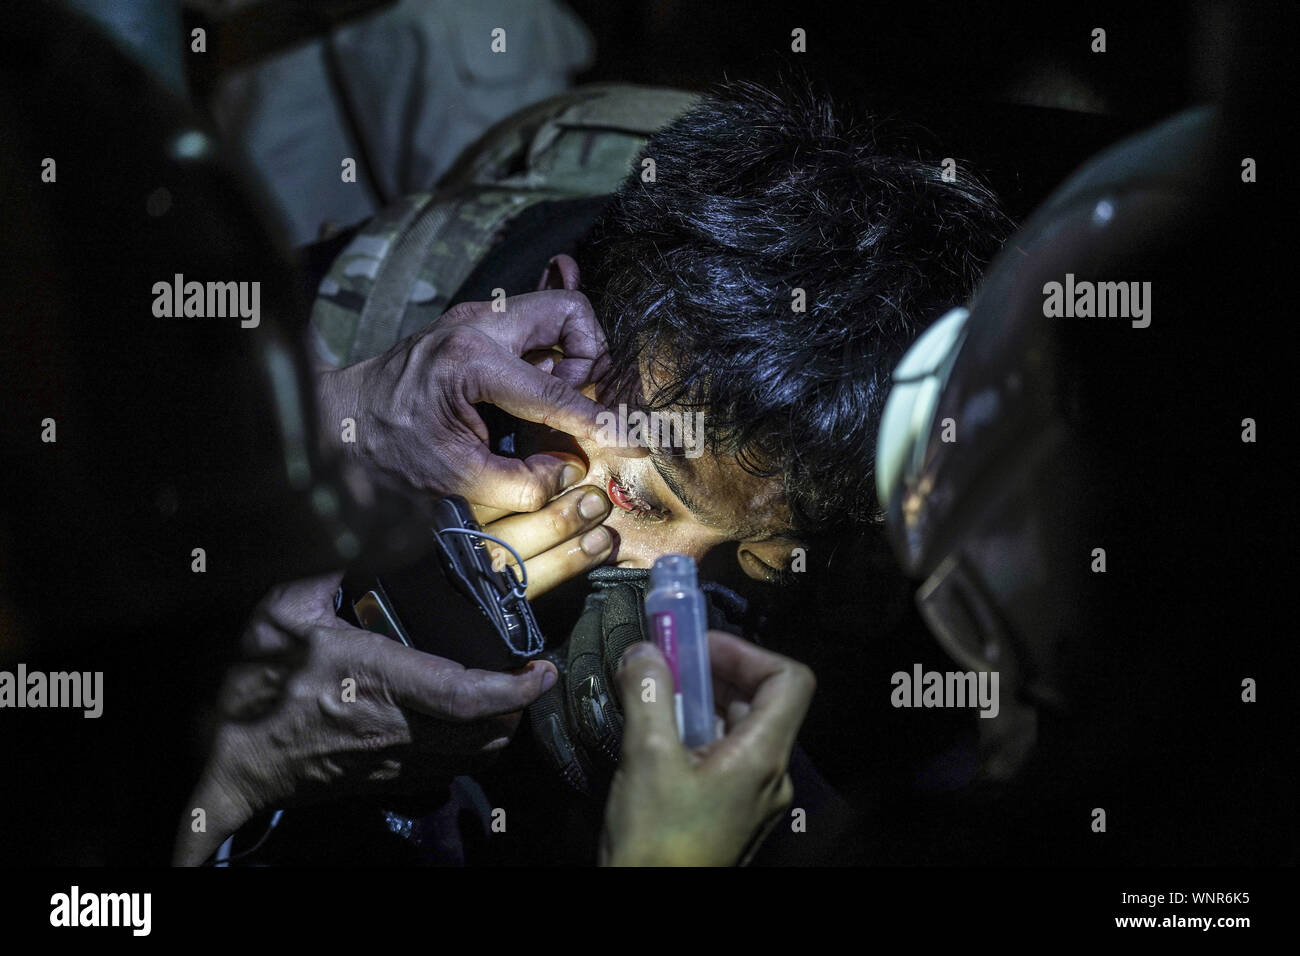 Kowloon, Hong Kong. 6th Sep, 2019. A protester is being treated on his eye by field medic on Friday September 6, 2019in Mong Kok Town Kowloon, Hong Kong.Thousands of protestors gathered outside of Mong Kok police station and around that area to protest the police violence against citizens of Hong Kong.Protesters Moved Nathan Rd to south, destroying surveillance cameras, street signs, building barricades with wooden panes and garbages then set on fire as they move on.9/6/2019.Kowloon, Hong Kong. Credit: ZUMA Press, Inc./Alamy Live News Stock Photo